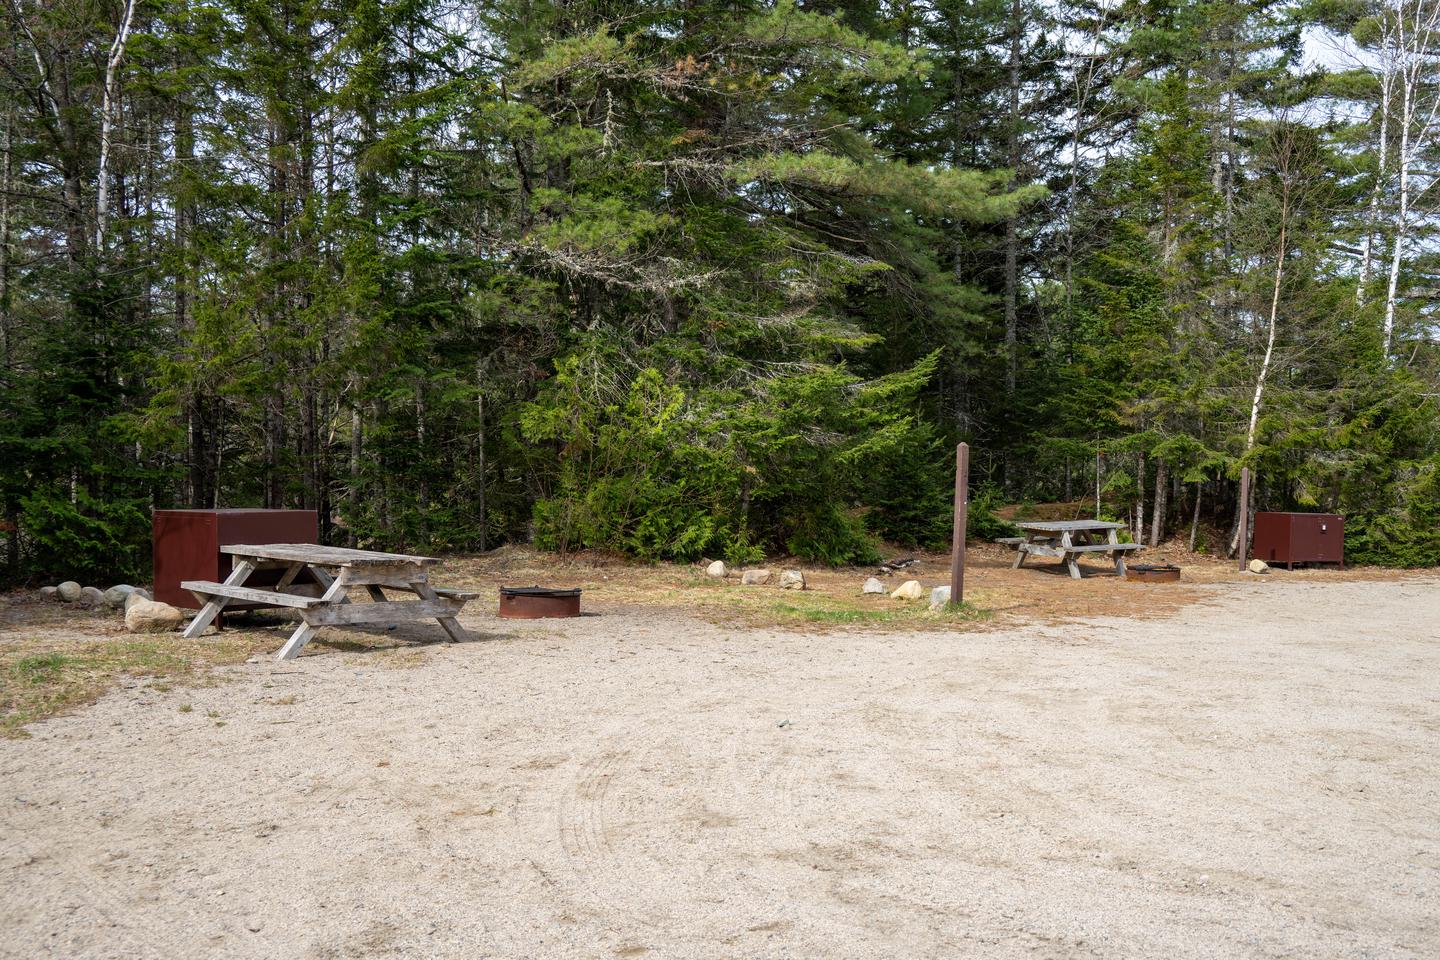 Two campsites on a grassy and gravel surface, next to a forested area. Both sites have metal fire rings and food storage boxes.Sandbank Stream has two individual campsites as you enter.